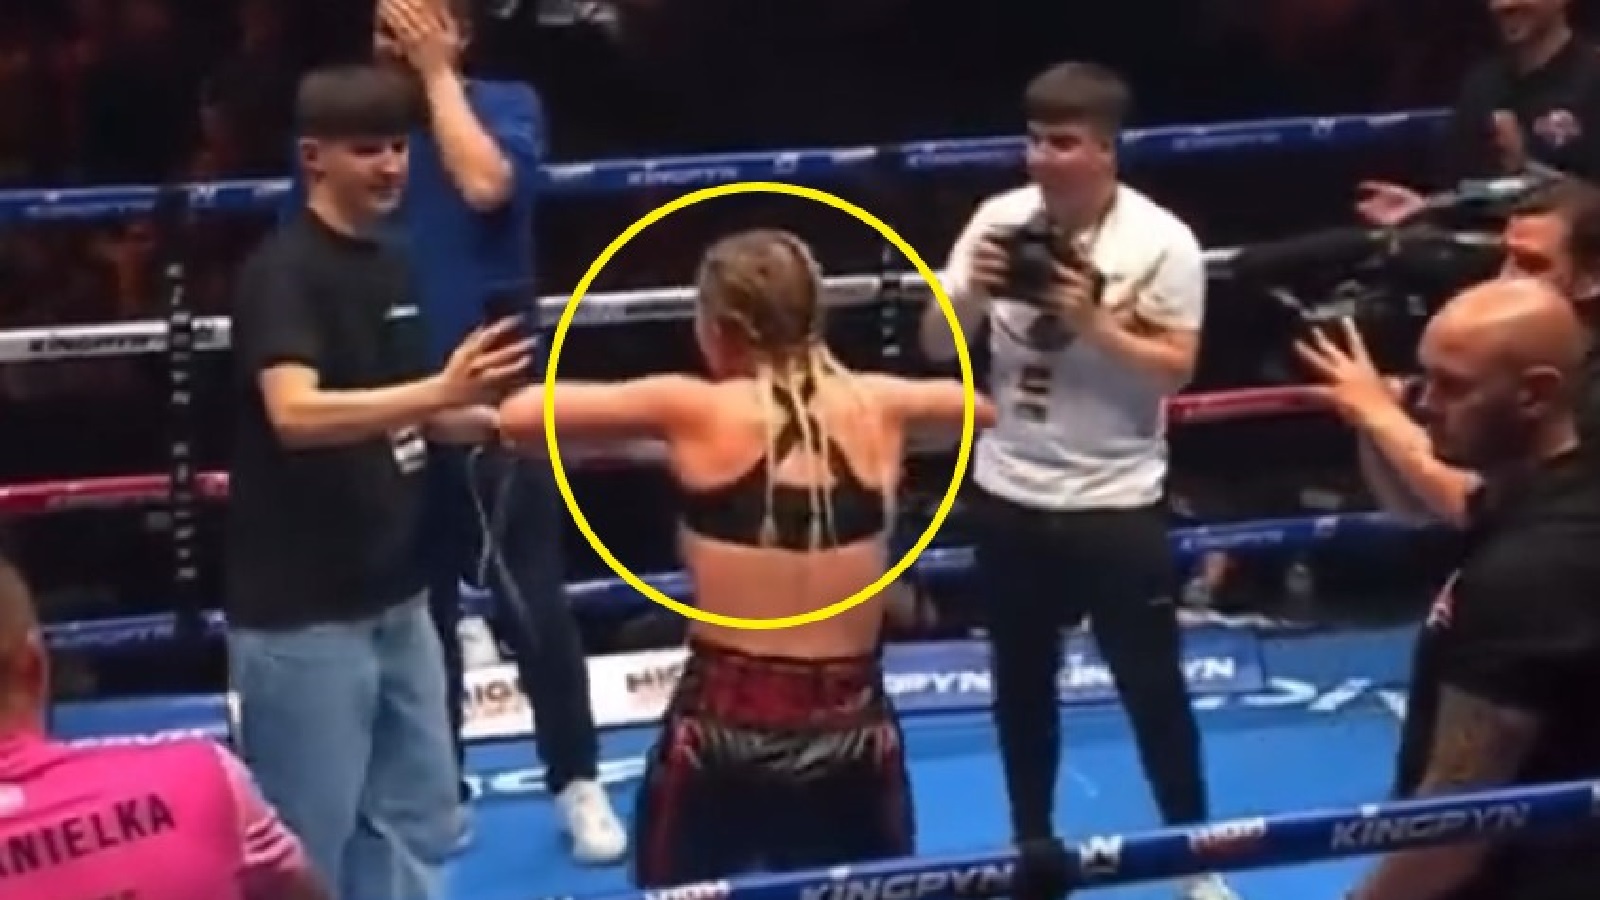 Boxer Daniella Hemsley disciplined over post-fight flashing incident